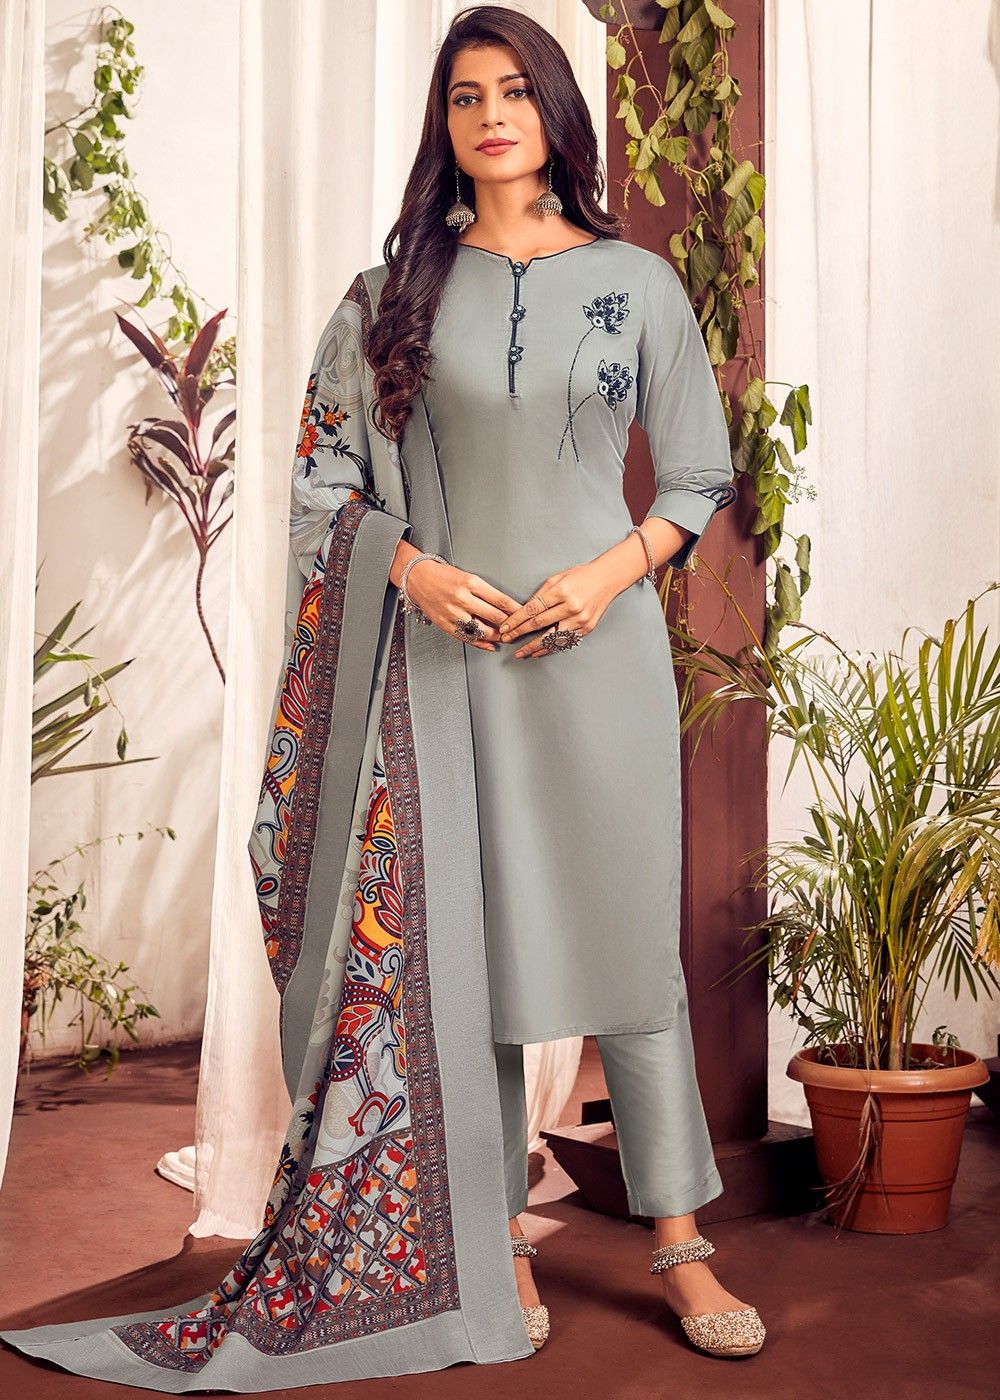 Buy Handloom Indian Trouser Suit In Light Blue Colour Online  LSTV04996   Andaaz Fashion